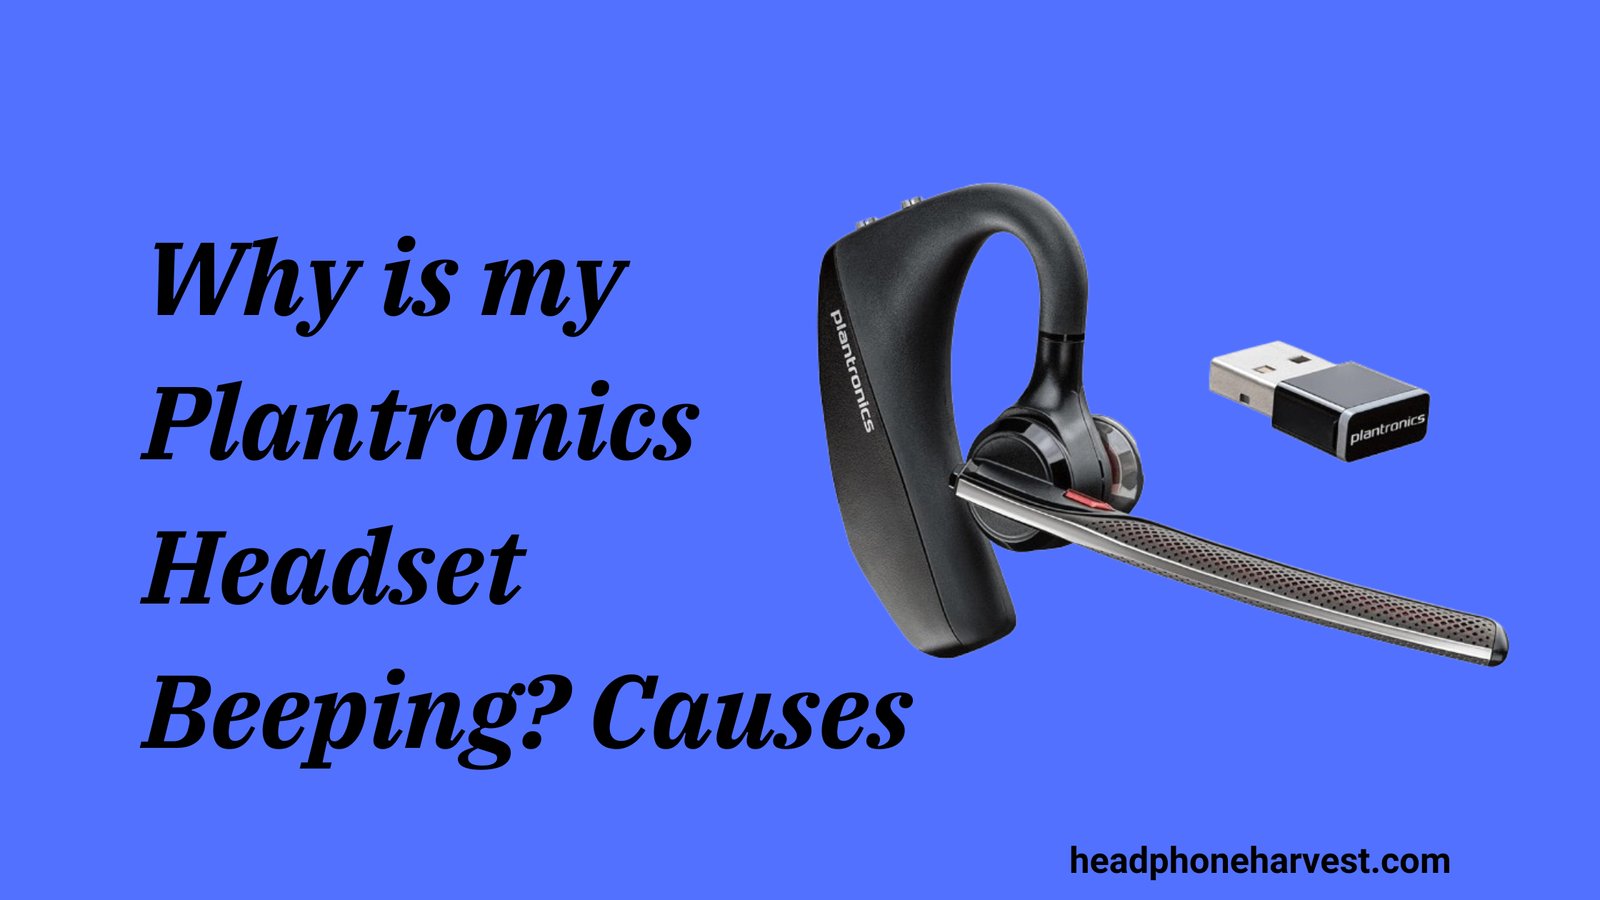 Why is my Plantronics Headset Beeping